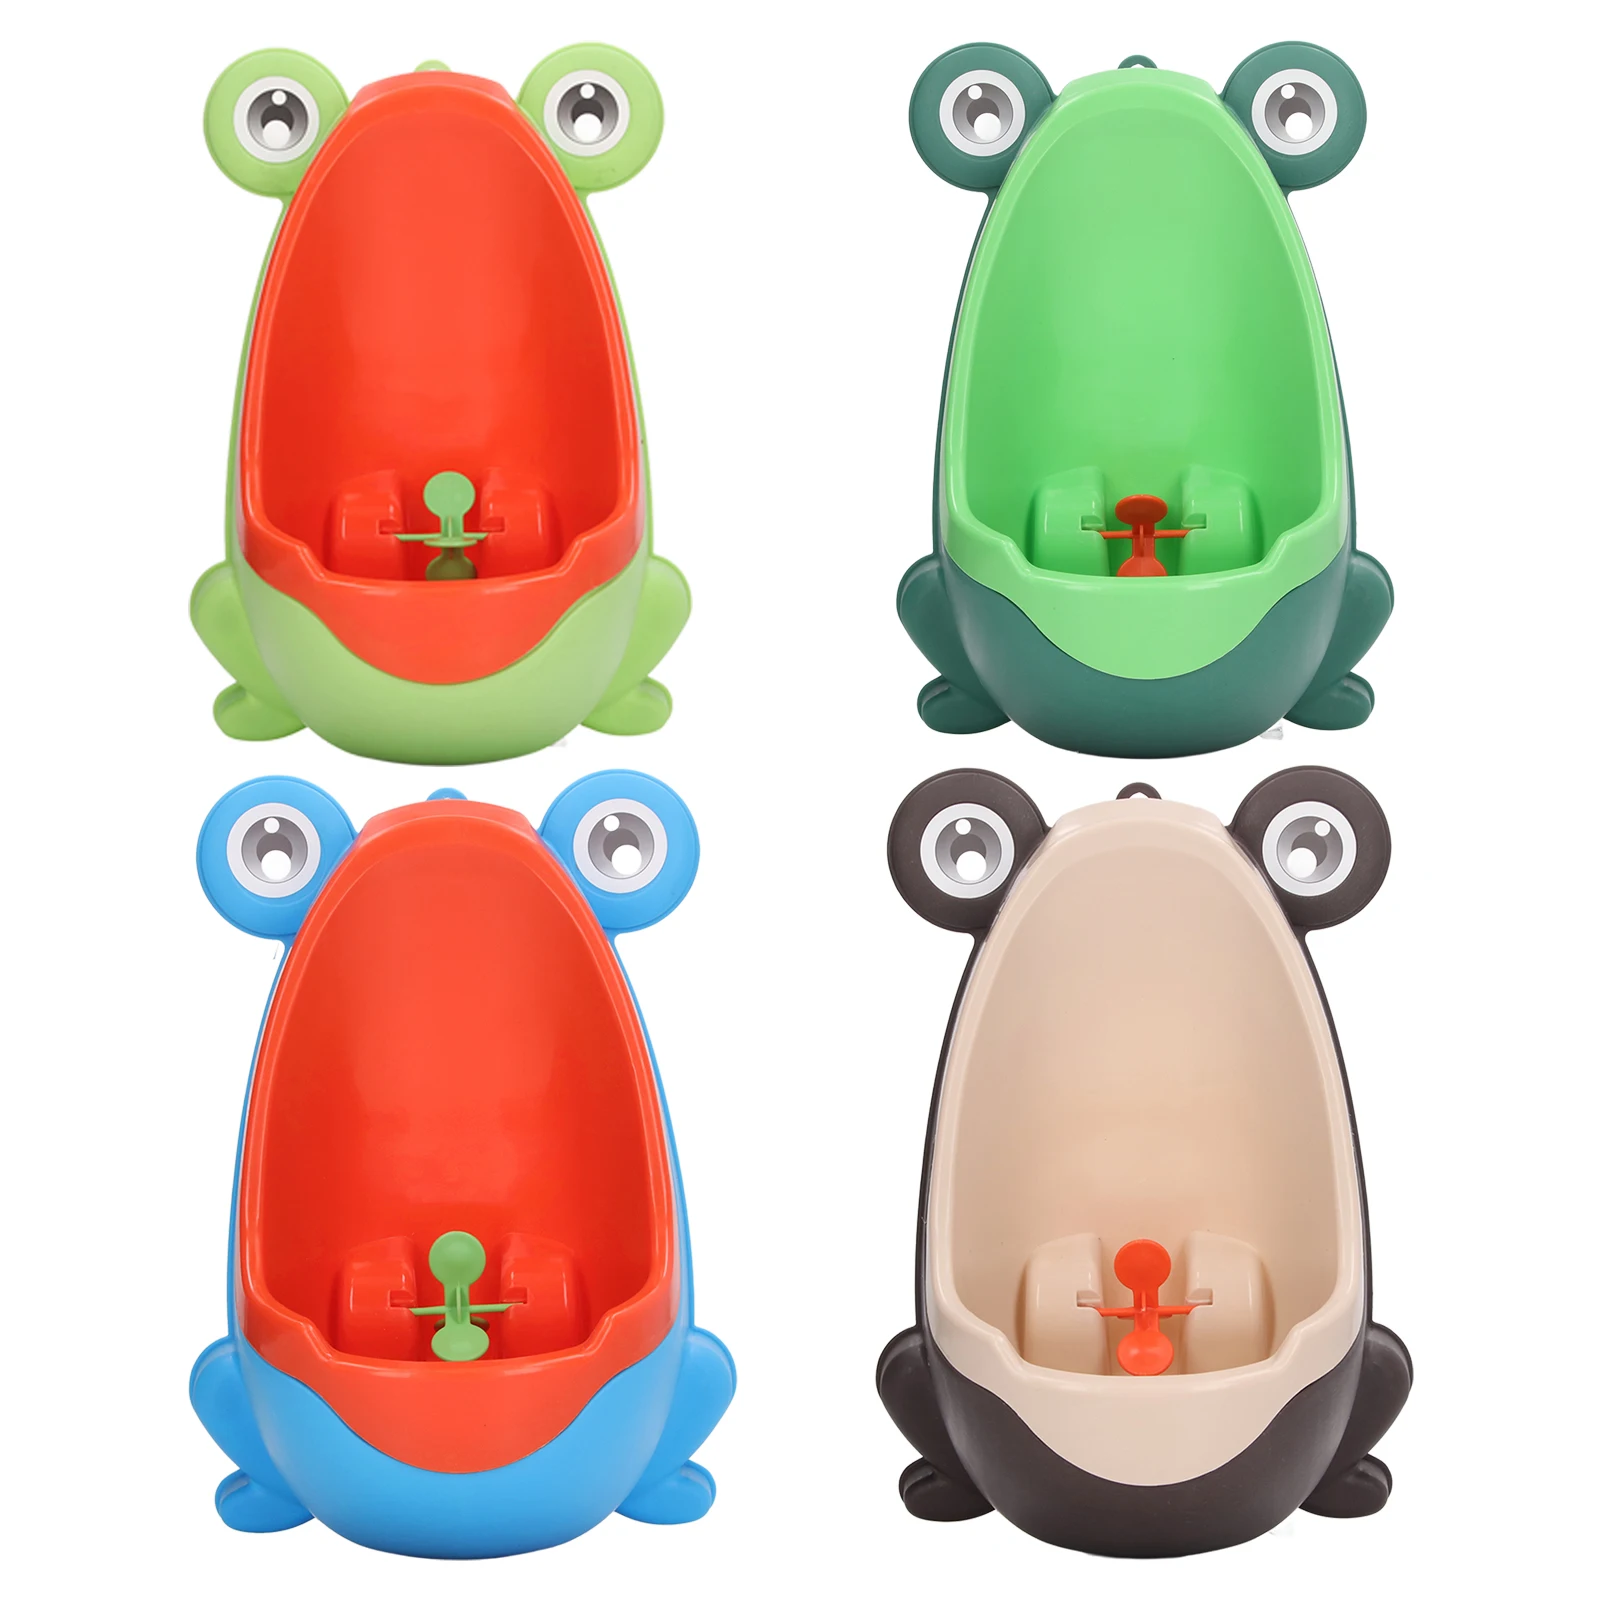 Baby Boys Standing Potty Shape Wall-Mounted Urinals Toilet Training Children Stand Vertical Urinal Potty children s pot wc baby boys girls toilet potty training seat kids oval toilet pad non slip splash guard infant potty cushion